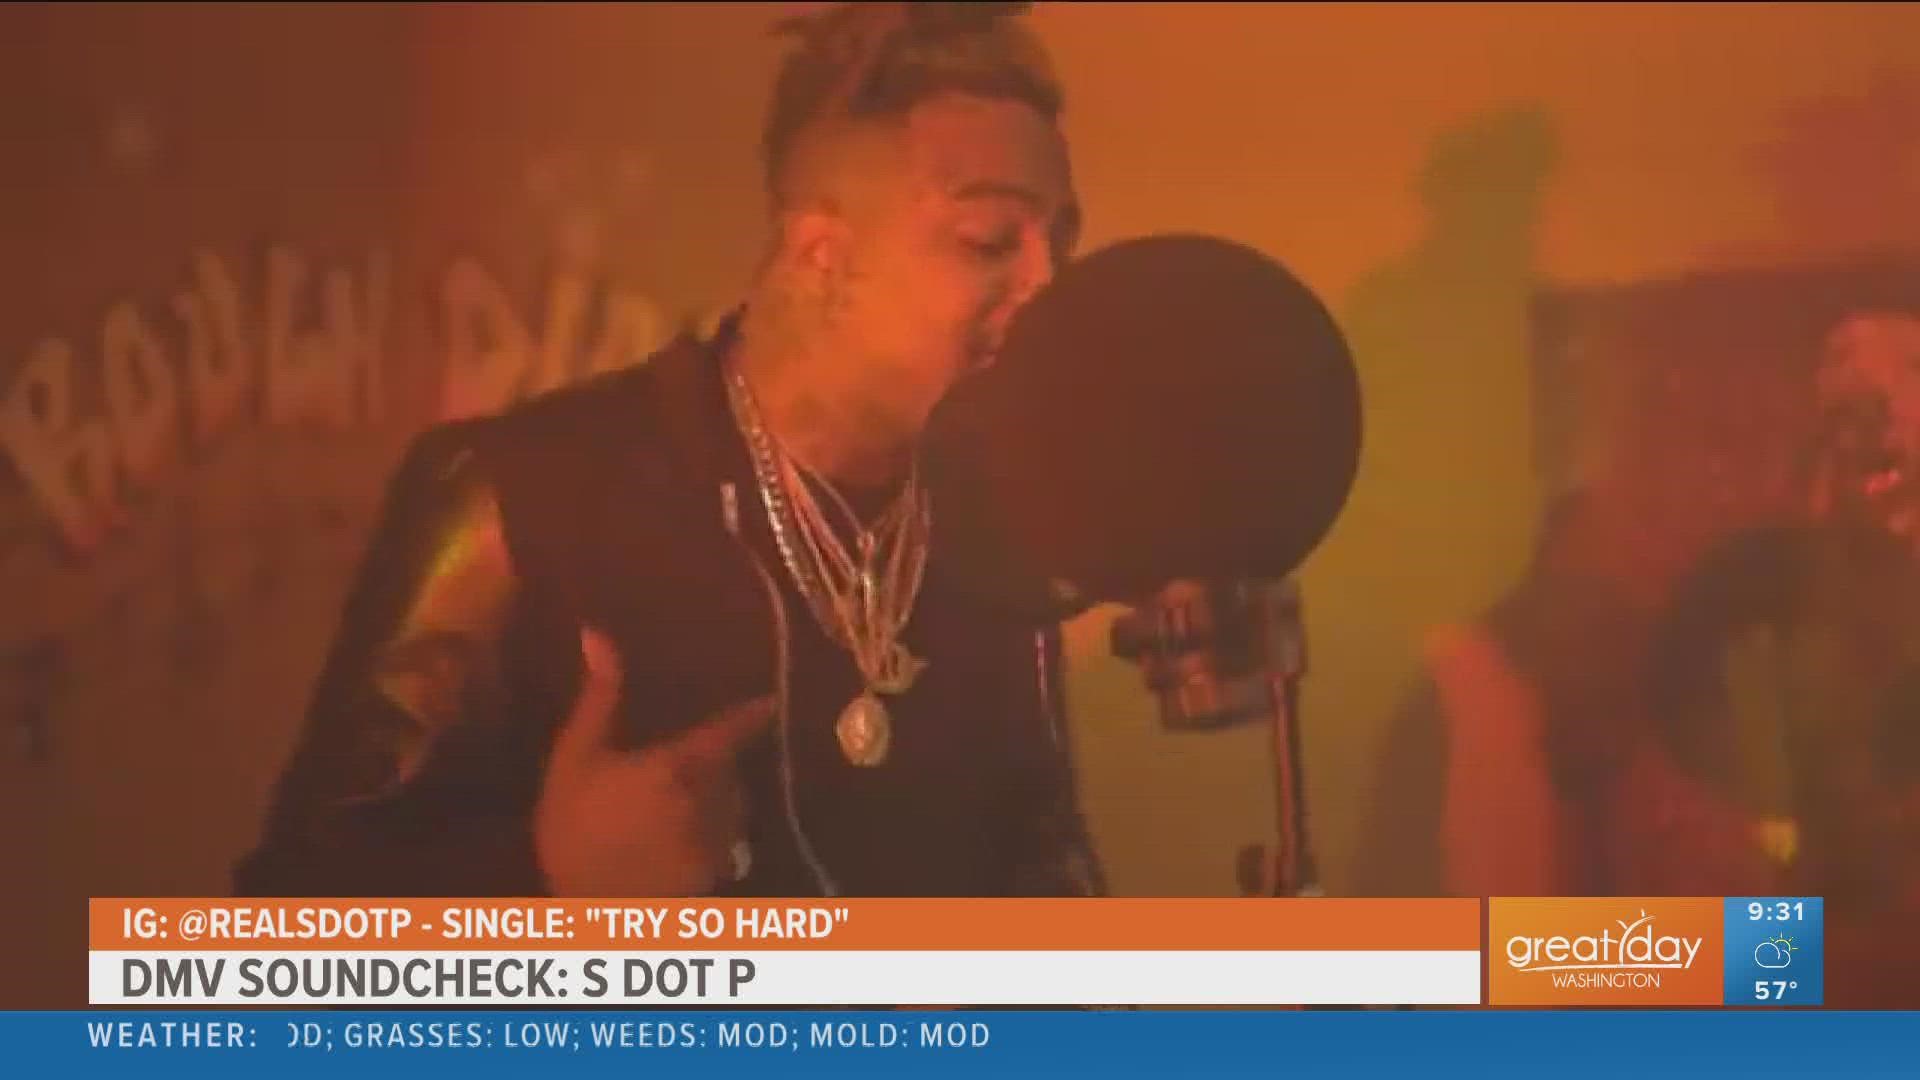 In today's DMV Soundcheck, local artist S Dot P talks about his single 'Try So Hard.'